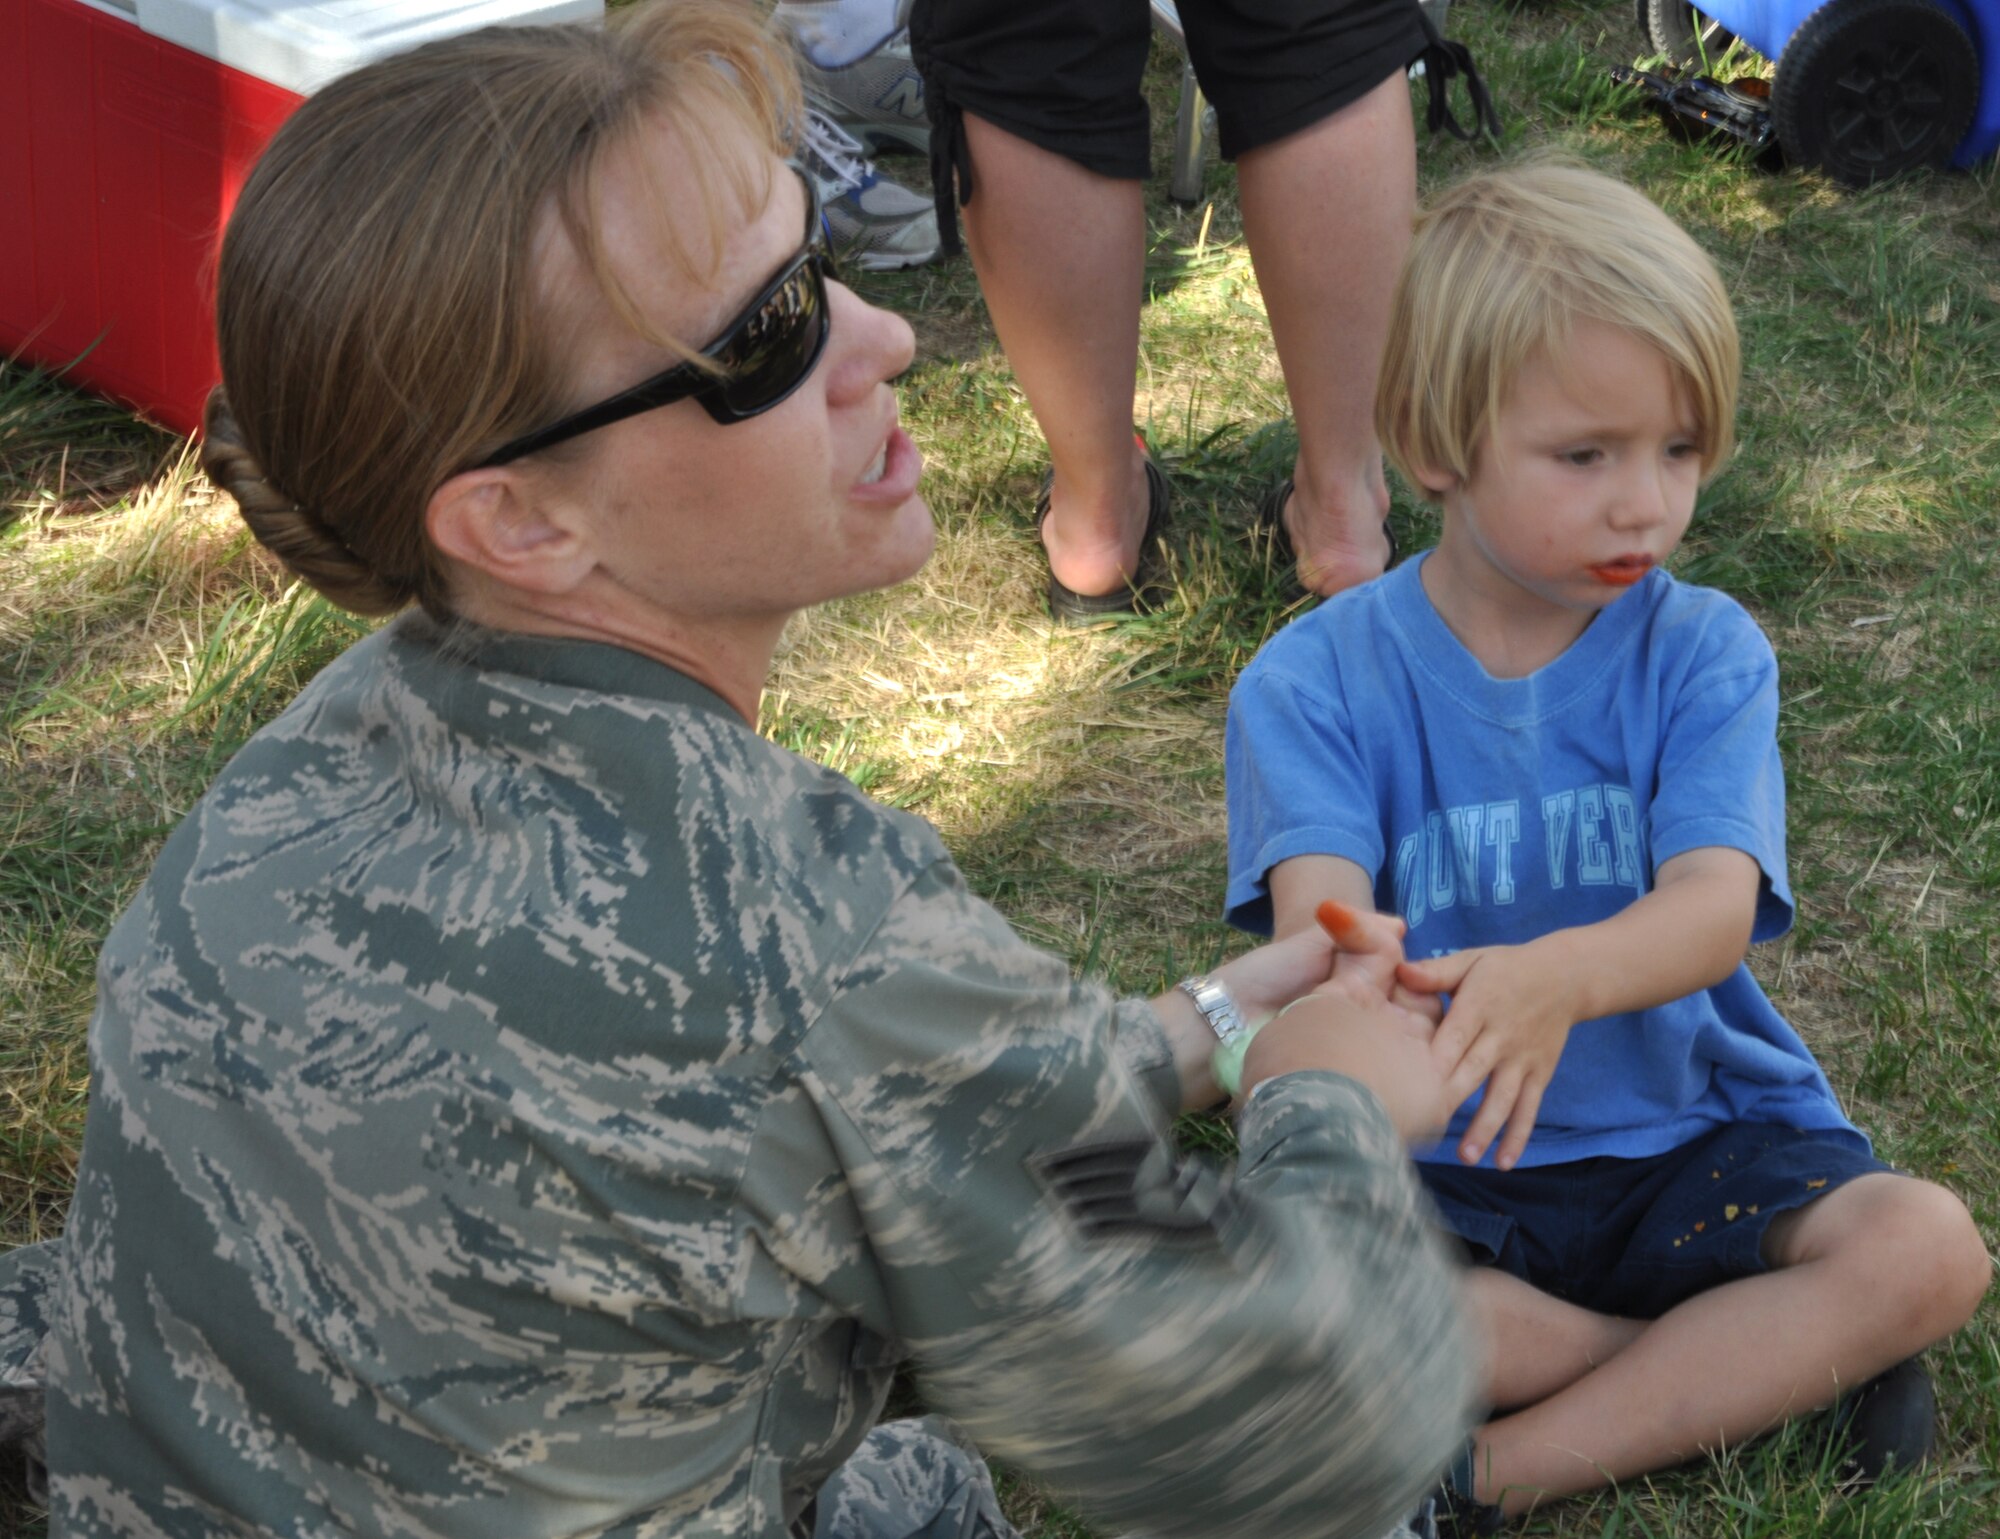 Staff Sgt. Denise Flory, an Air Force Reservist with the 302nd Maintenance Group, helps her son Luke, 4, with his barbecue dinner July 10 during a 302nd MXG outing at Security Service Field in Colorado Springs, Colo. The C-130 Hercules maintainers, assigned to the AF Reserve's 302nd Airlift Wing at nearby Peterson Air Force Base, worked with the city's Sky Sox minor league baseball team to re-enlist five AF Reservists and one Active Duty Airmen in front of an estimated 3,000-person crowd.  (U.S. Air Force photo/Staff Sgt. Stephen J. Collier)